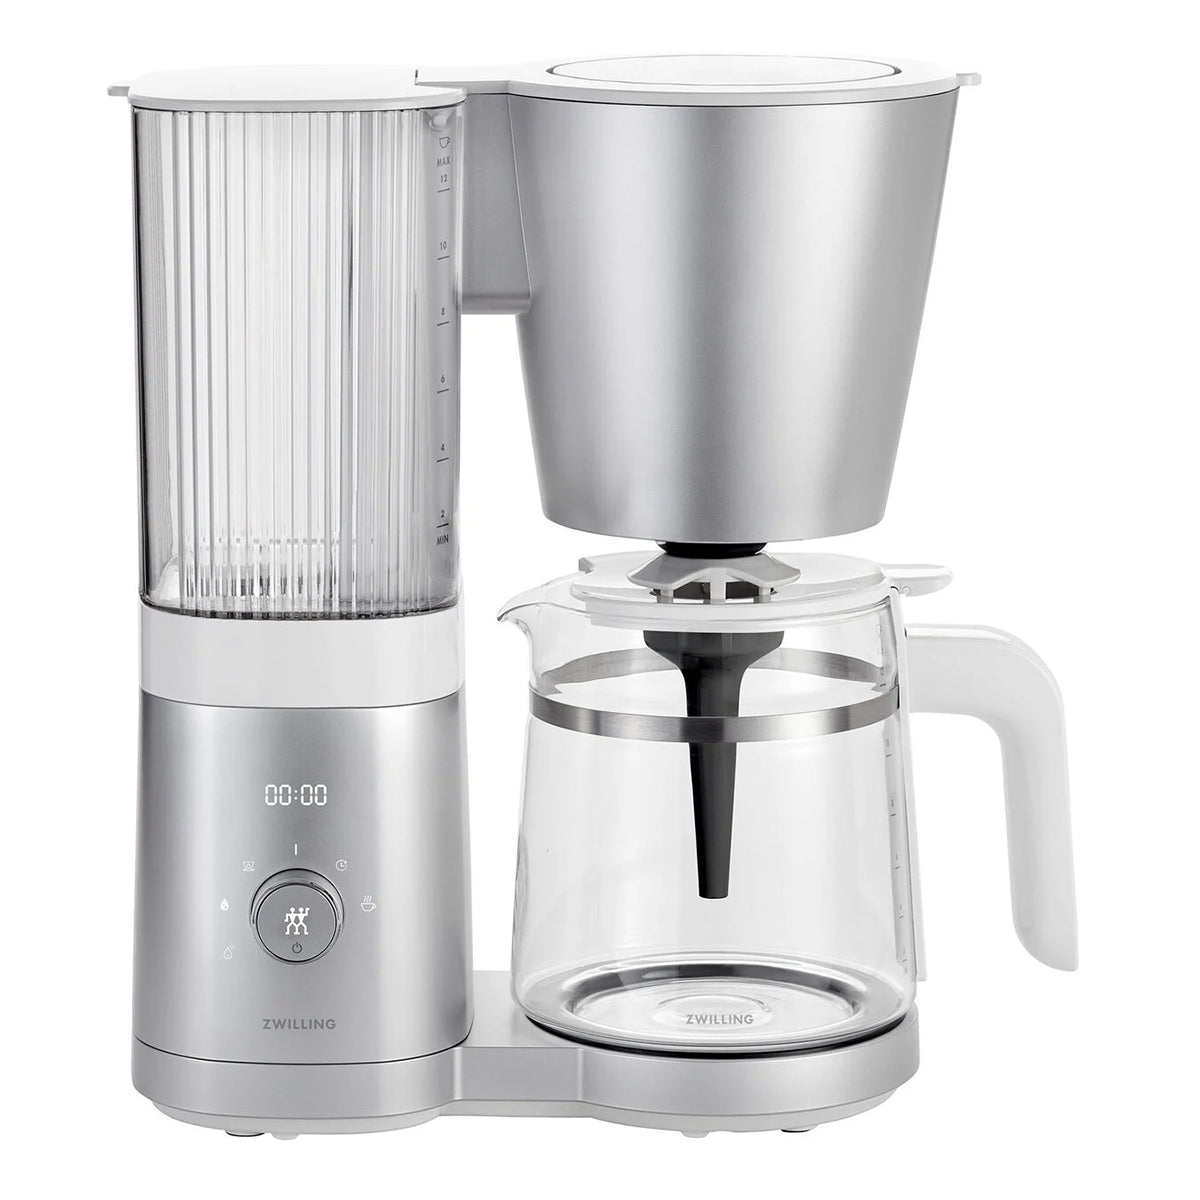 Cafe Specialty Drip Coffee Maker - White